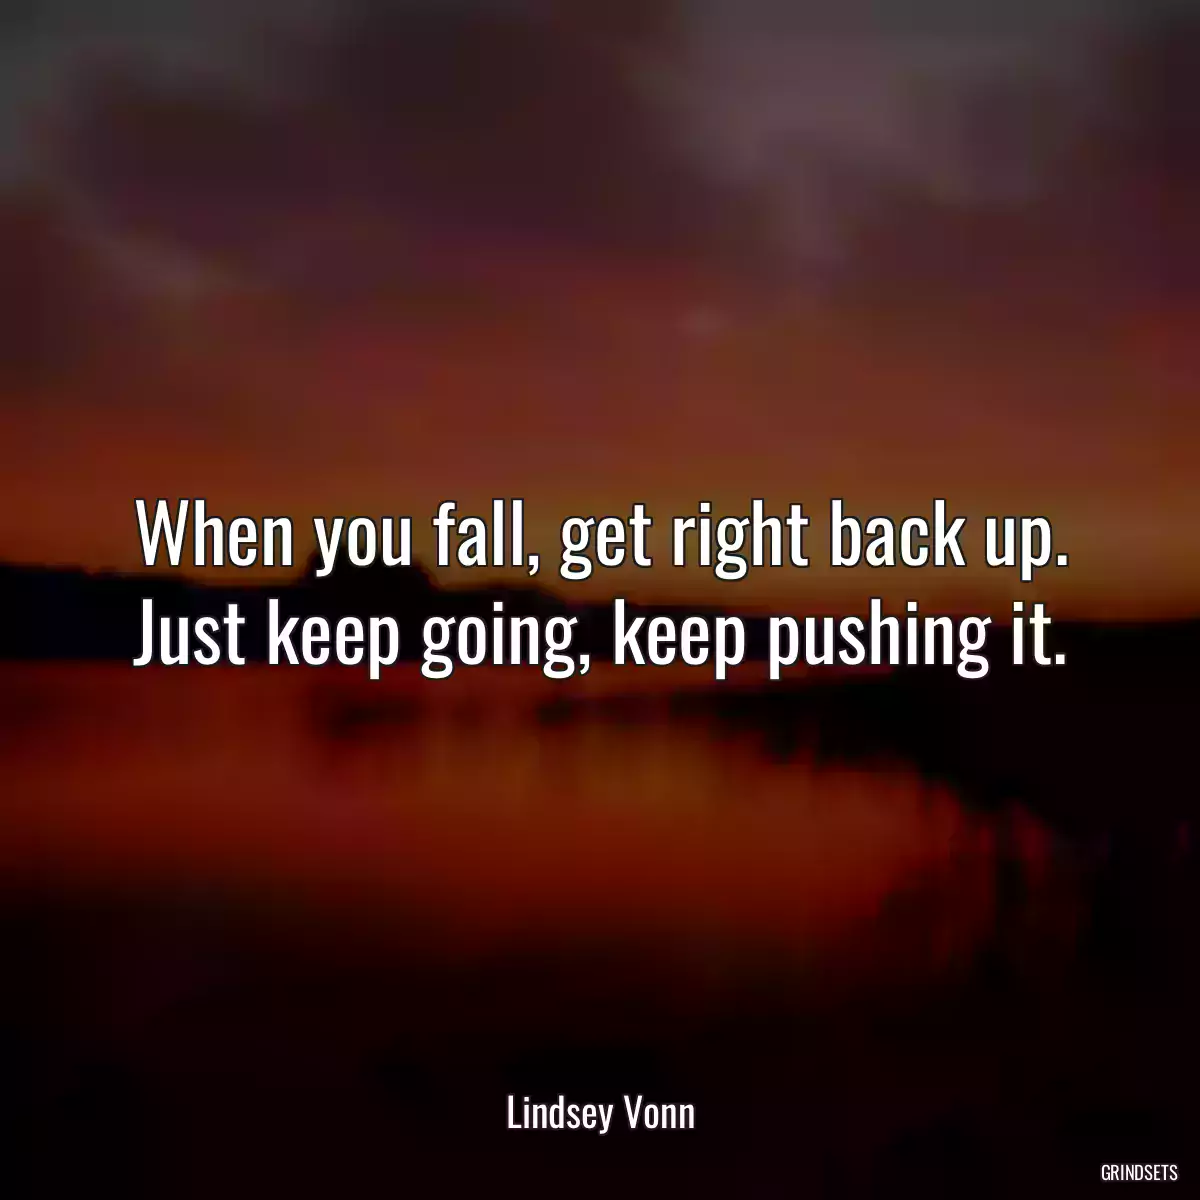 When you fall, get right back up. Just keep going, keep pushing it.